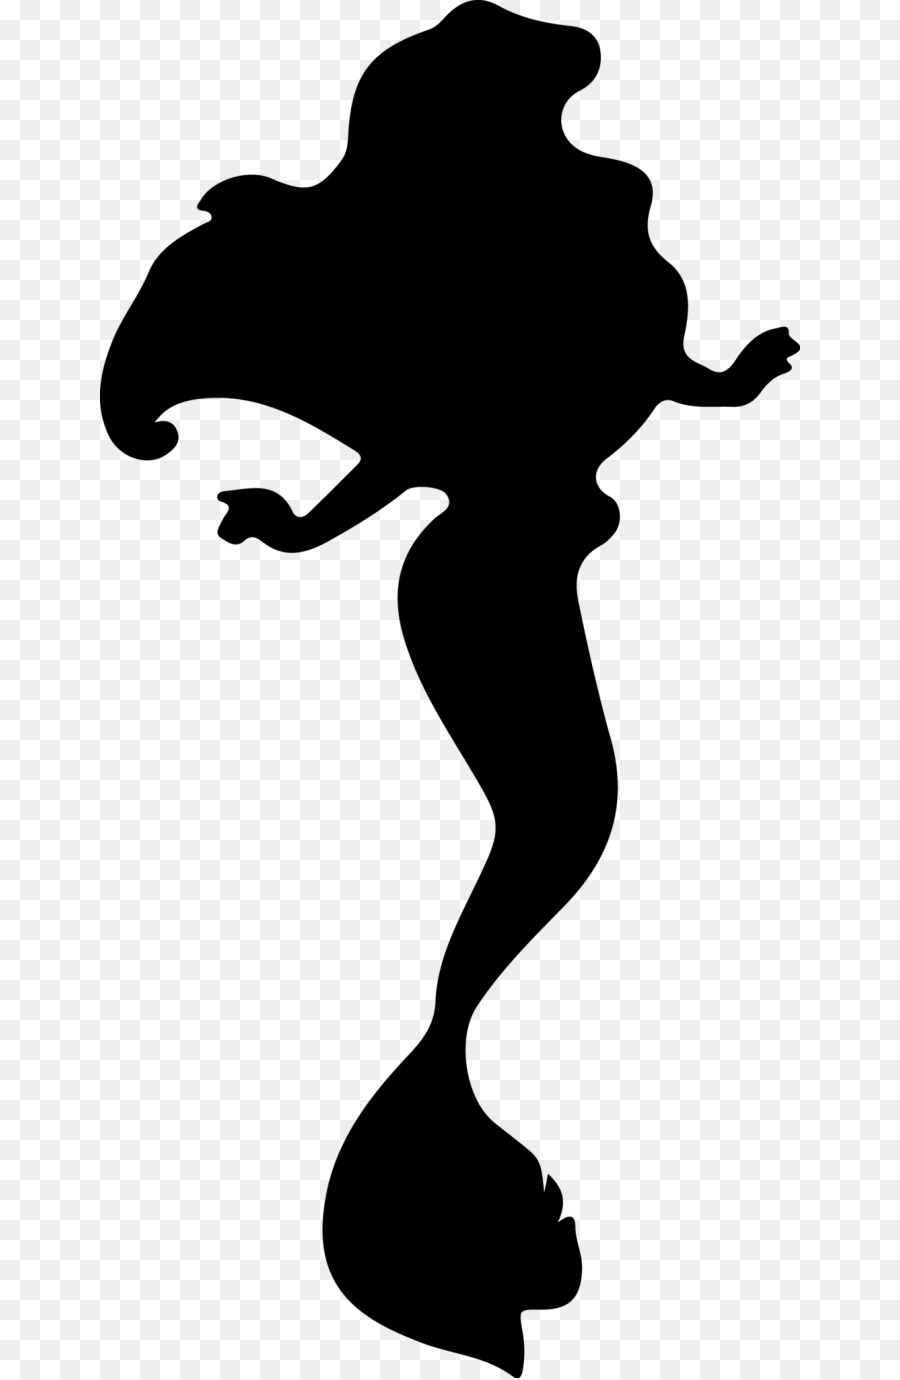 Free Disney Silhouette Svg Download Free Clip Art Free Clip Art On Clipart Library